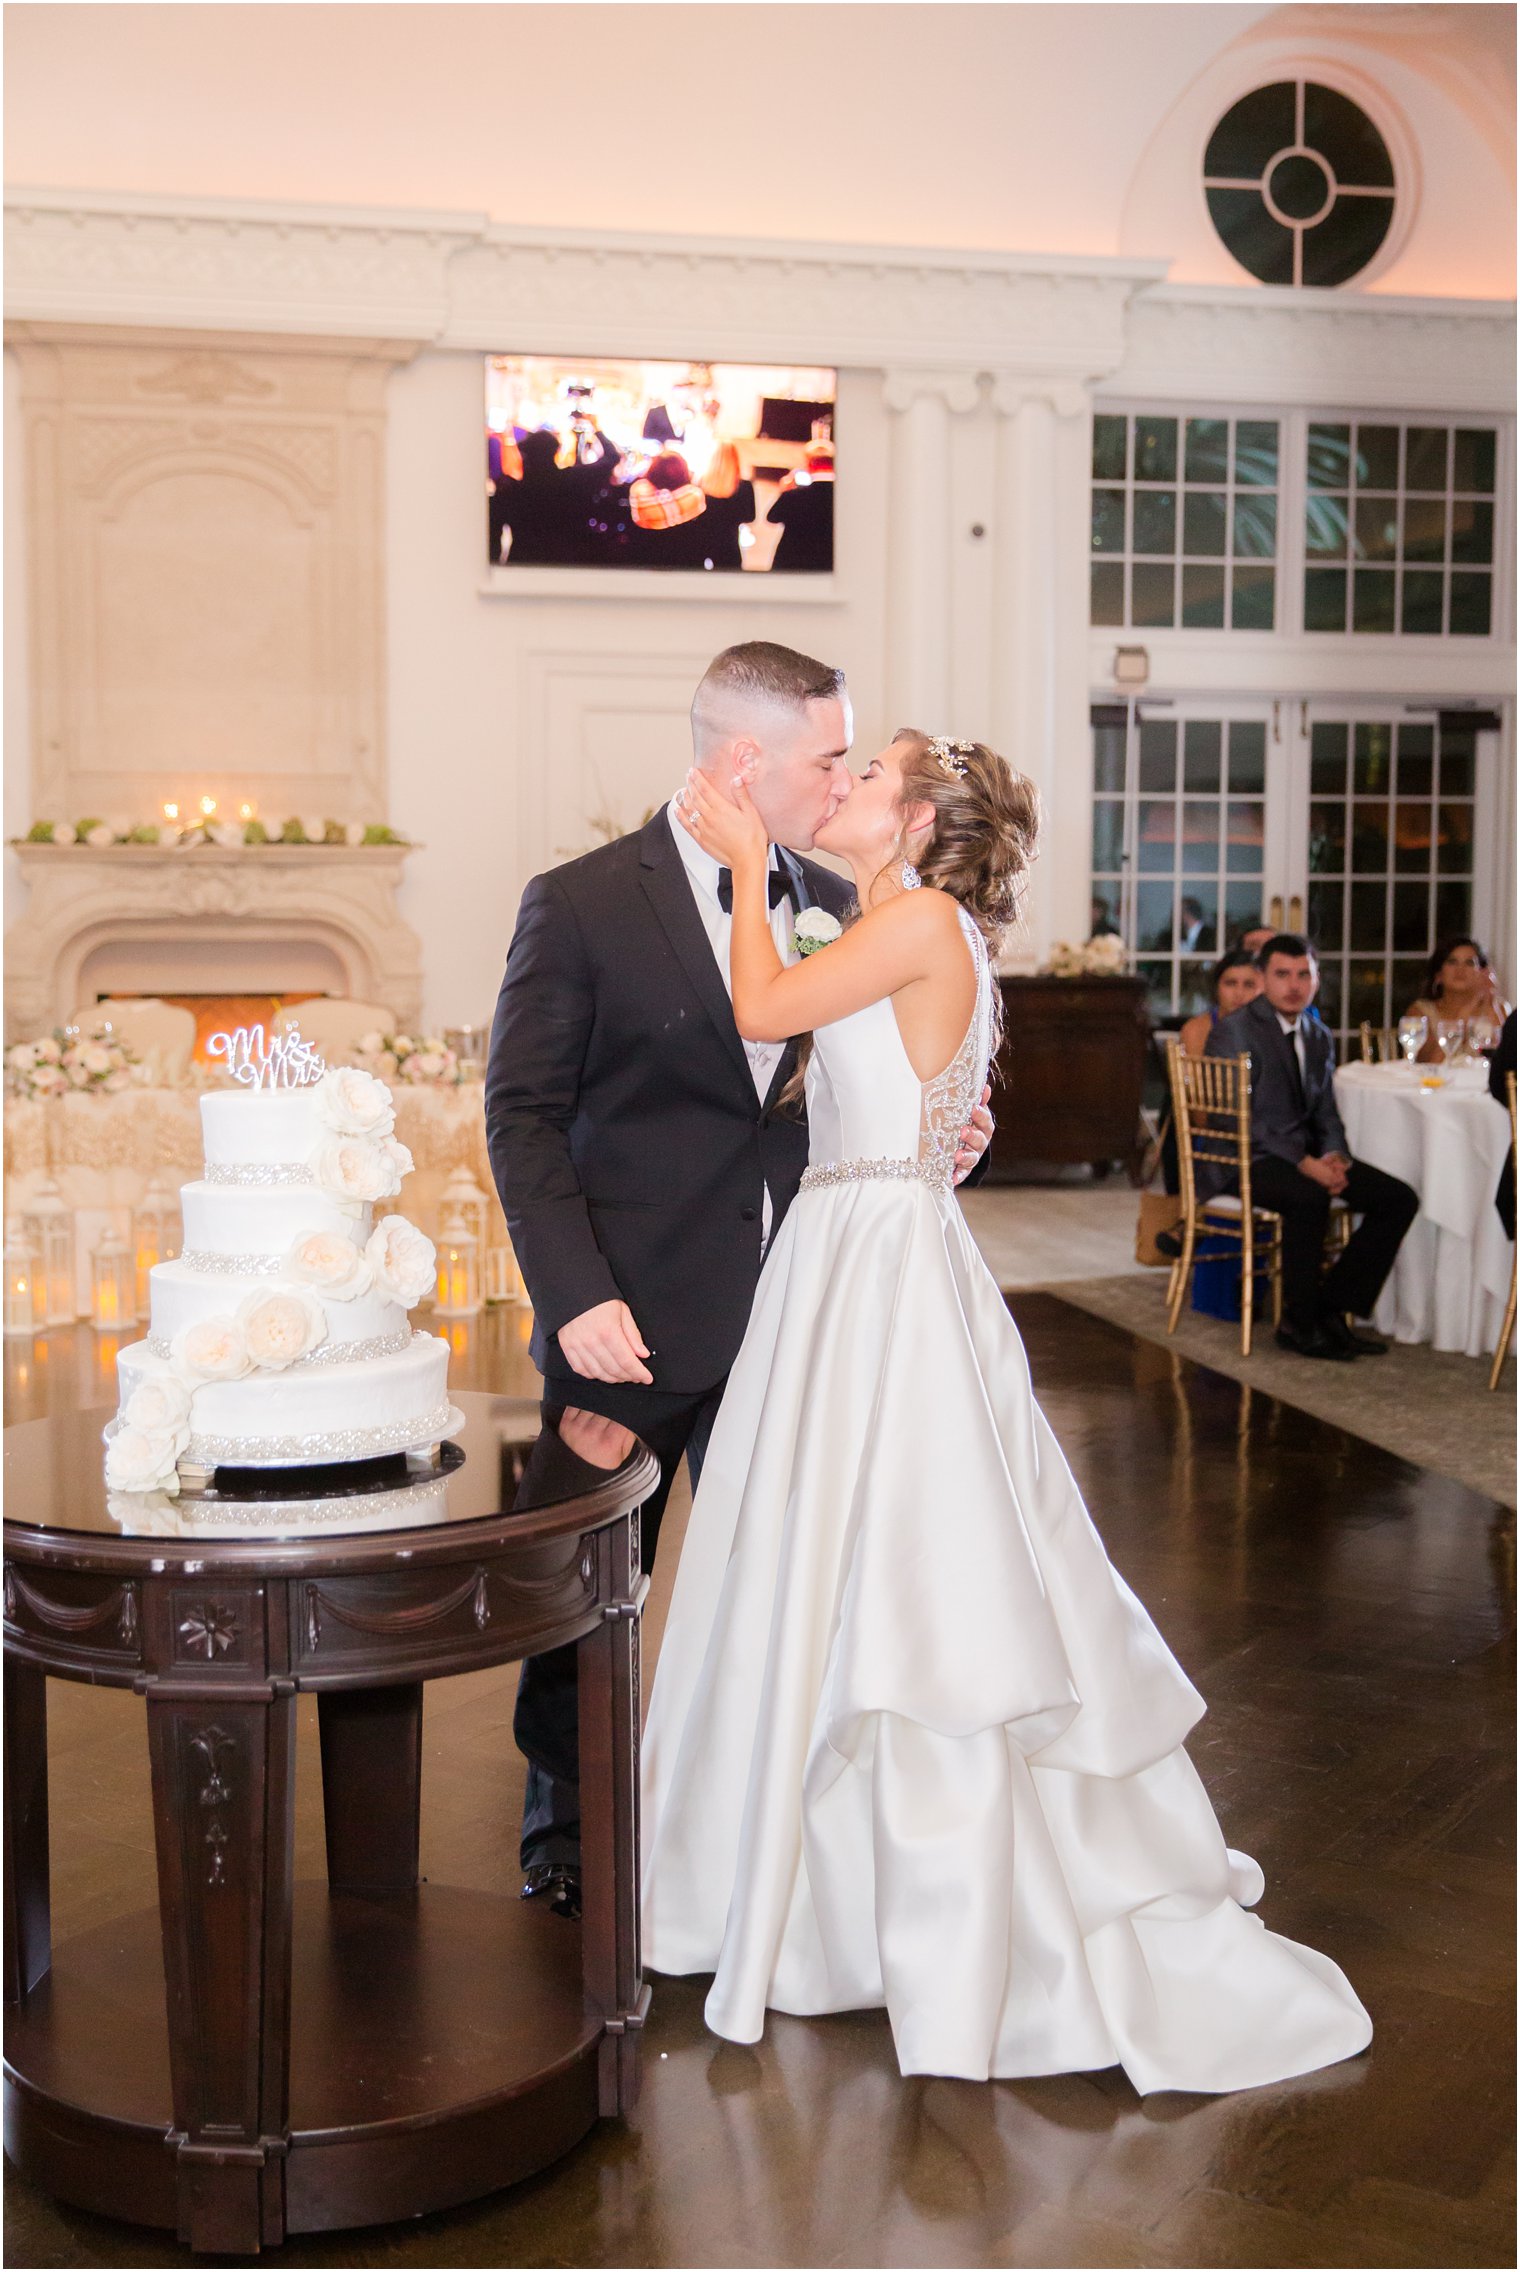 bride and groom cutting cake | Park Chateau Wedding Photography